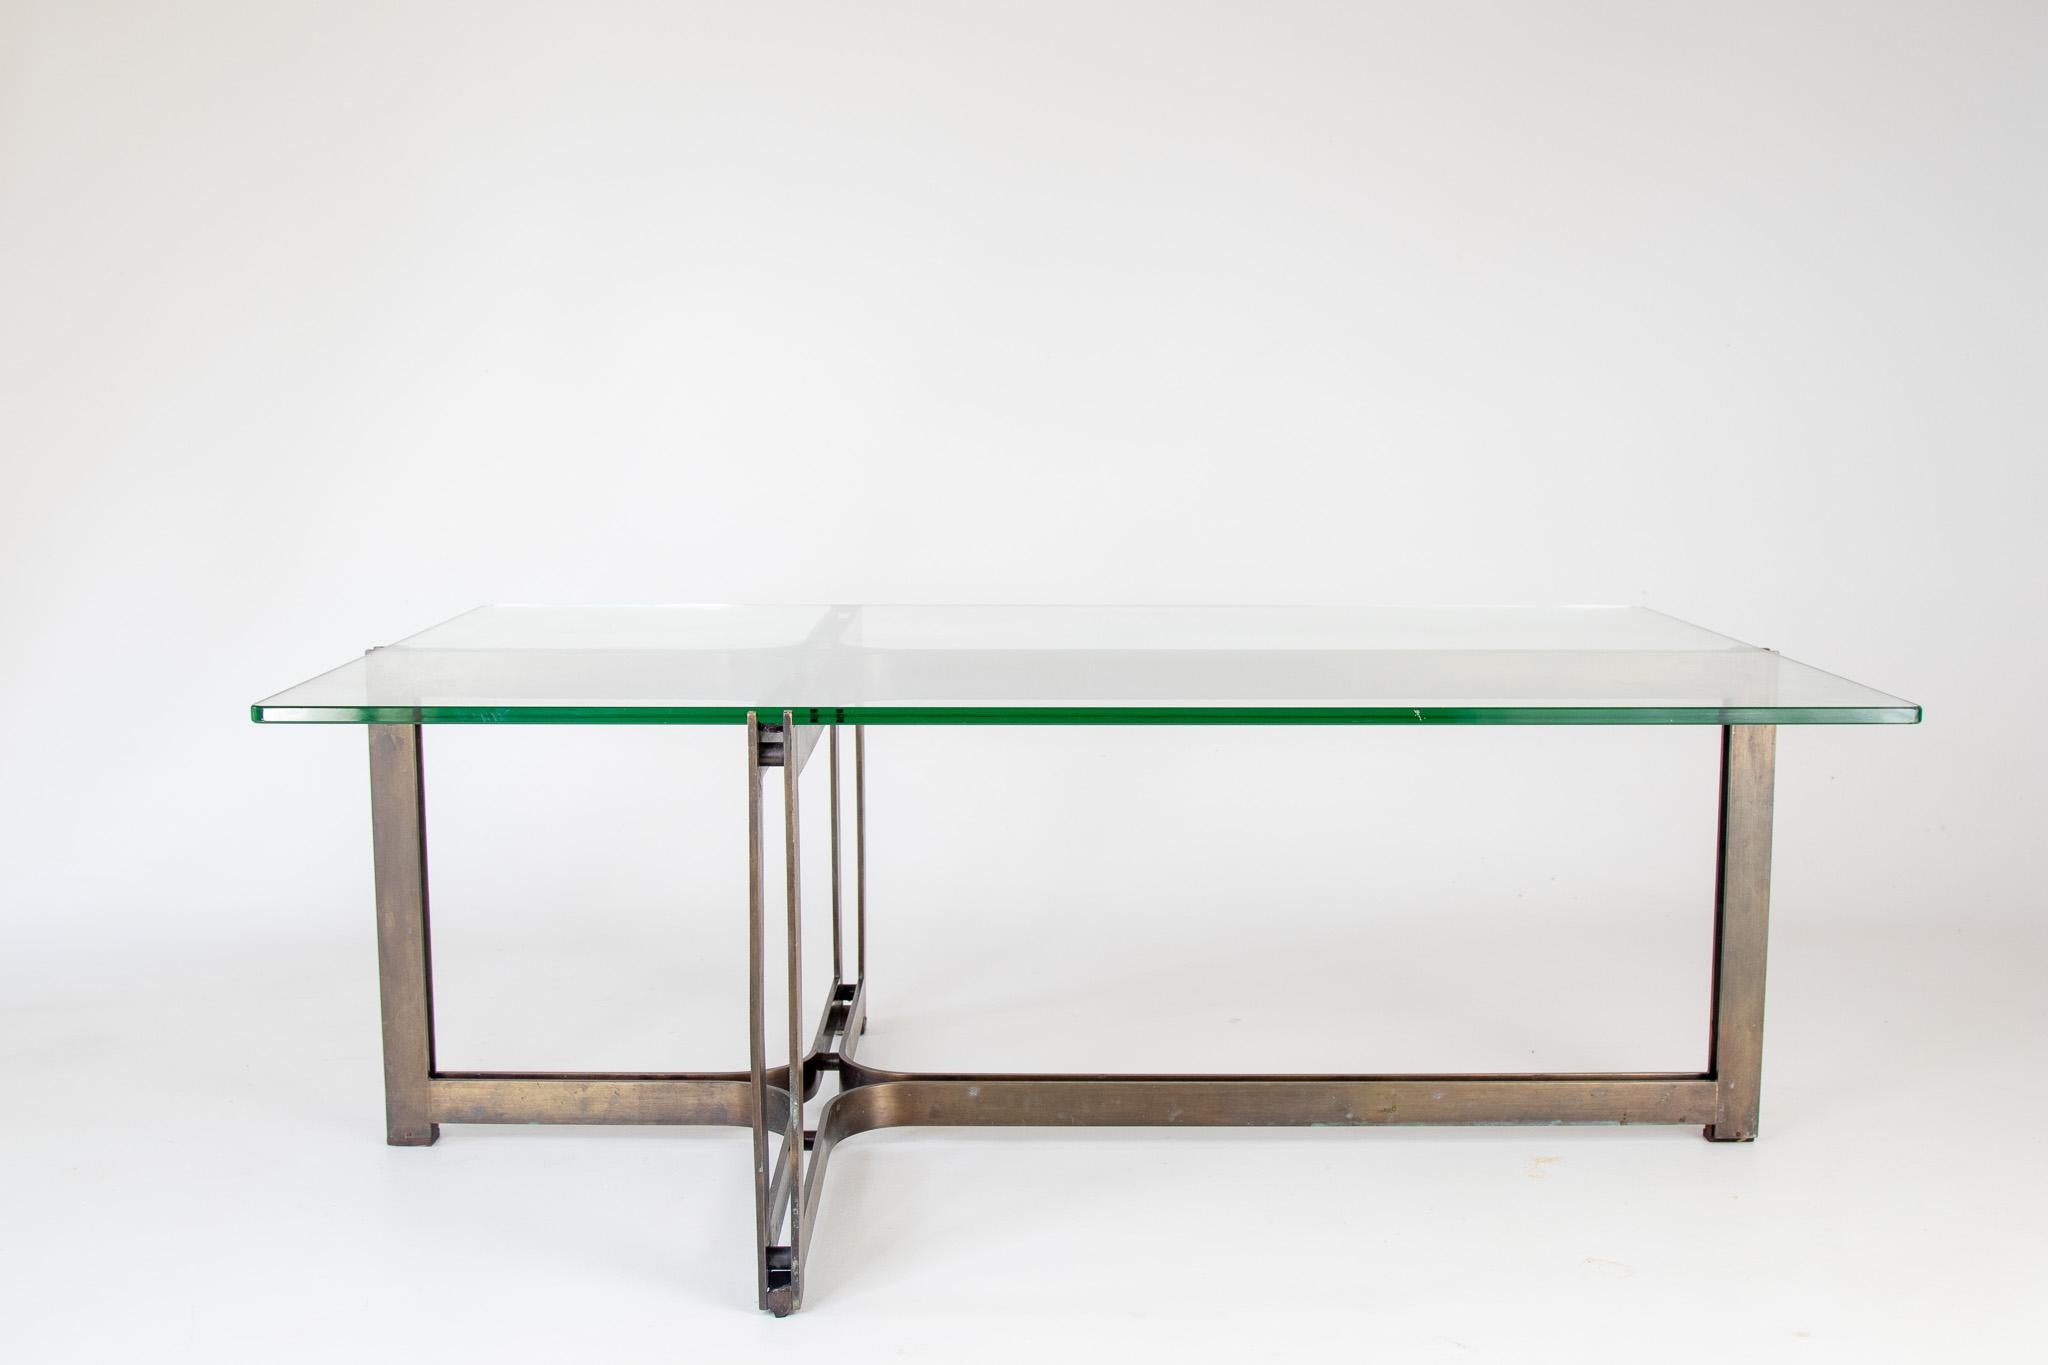 A solid bronze coffee table with a minimalist architectural form. Designed by Tom Lopinski for Dunbar furniture company in the 1970s. The glass top is original and shows a great green profile.  Similar to laverne, kjaerholm and mies van Der rohe